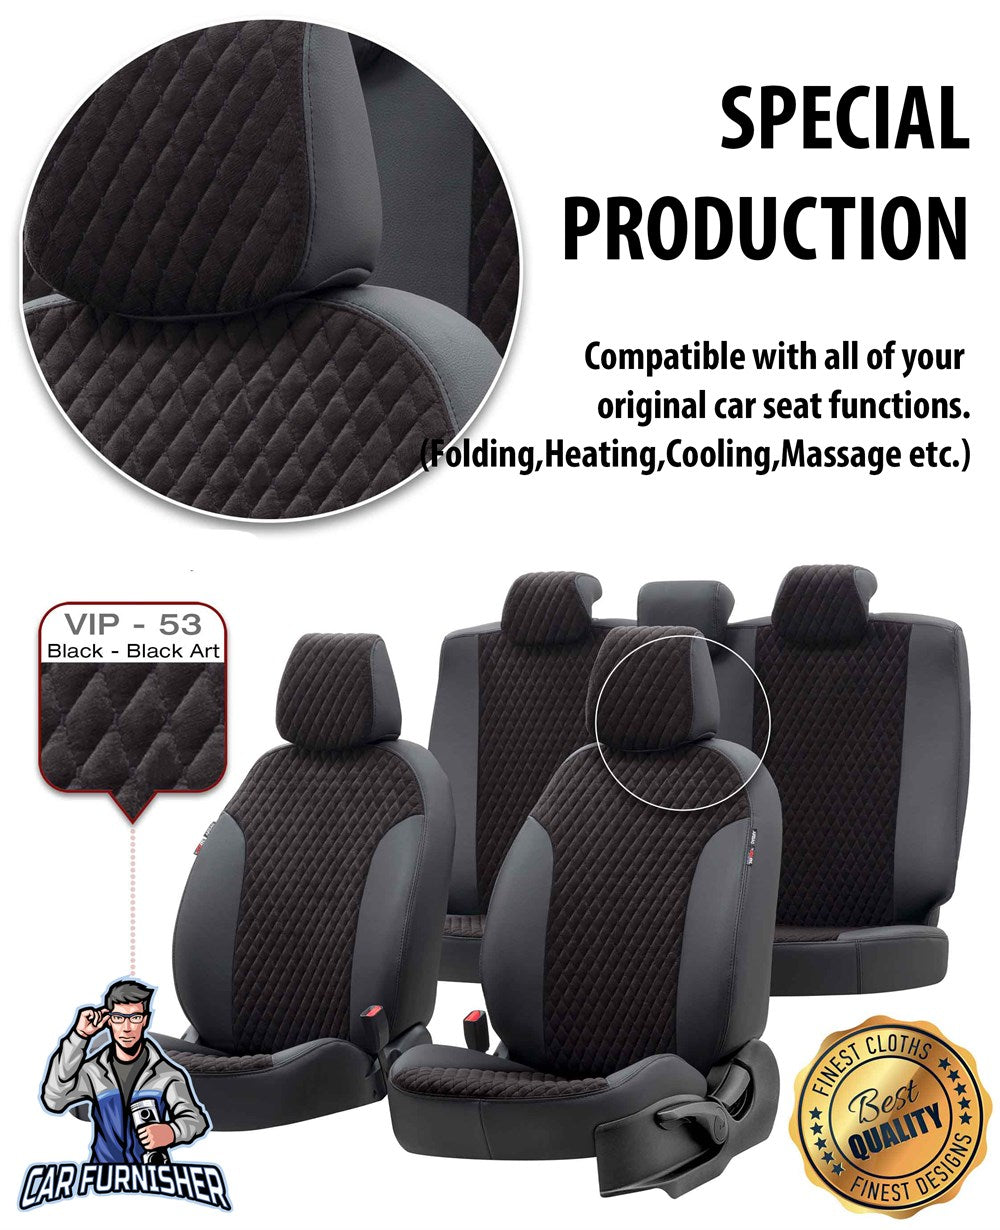 Volkswagen Amarok Seat Cover Amsterdam Foal Feather Design Dark Gray Leather & Foal Feather